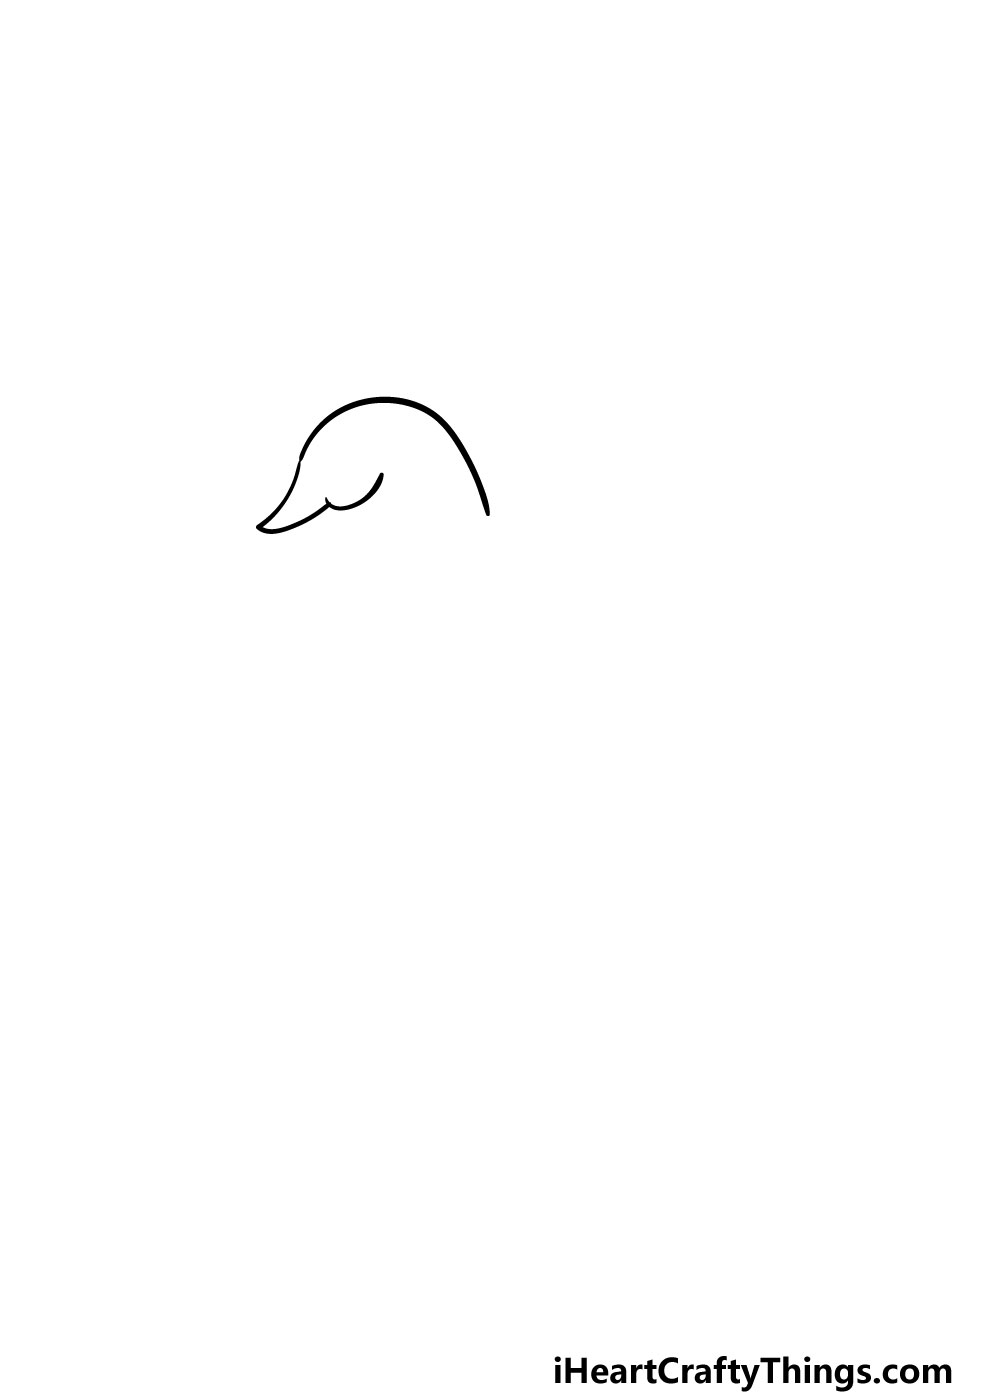 drawing a swan step 1